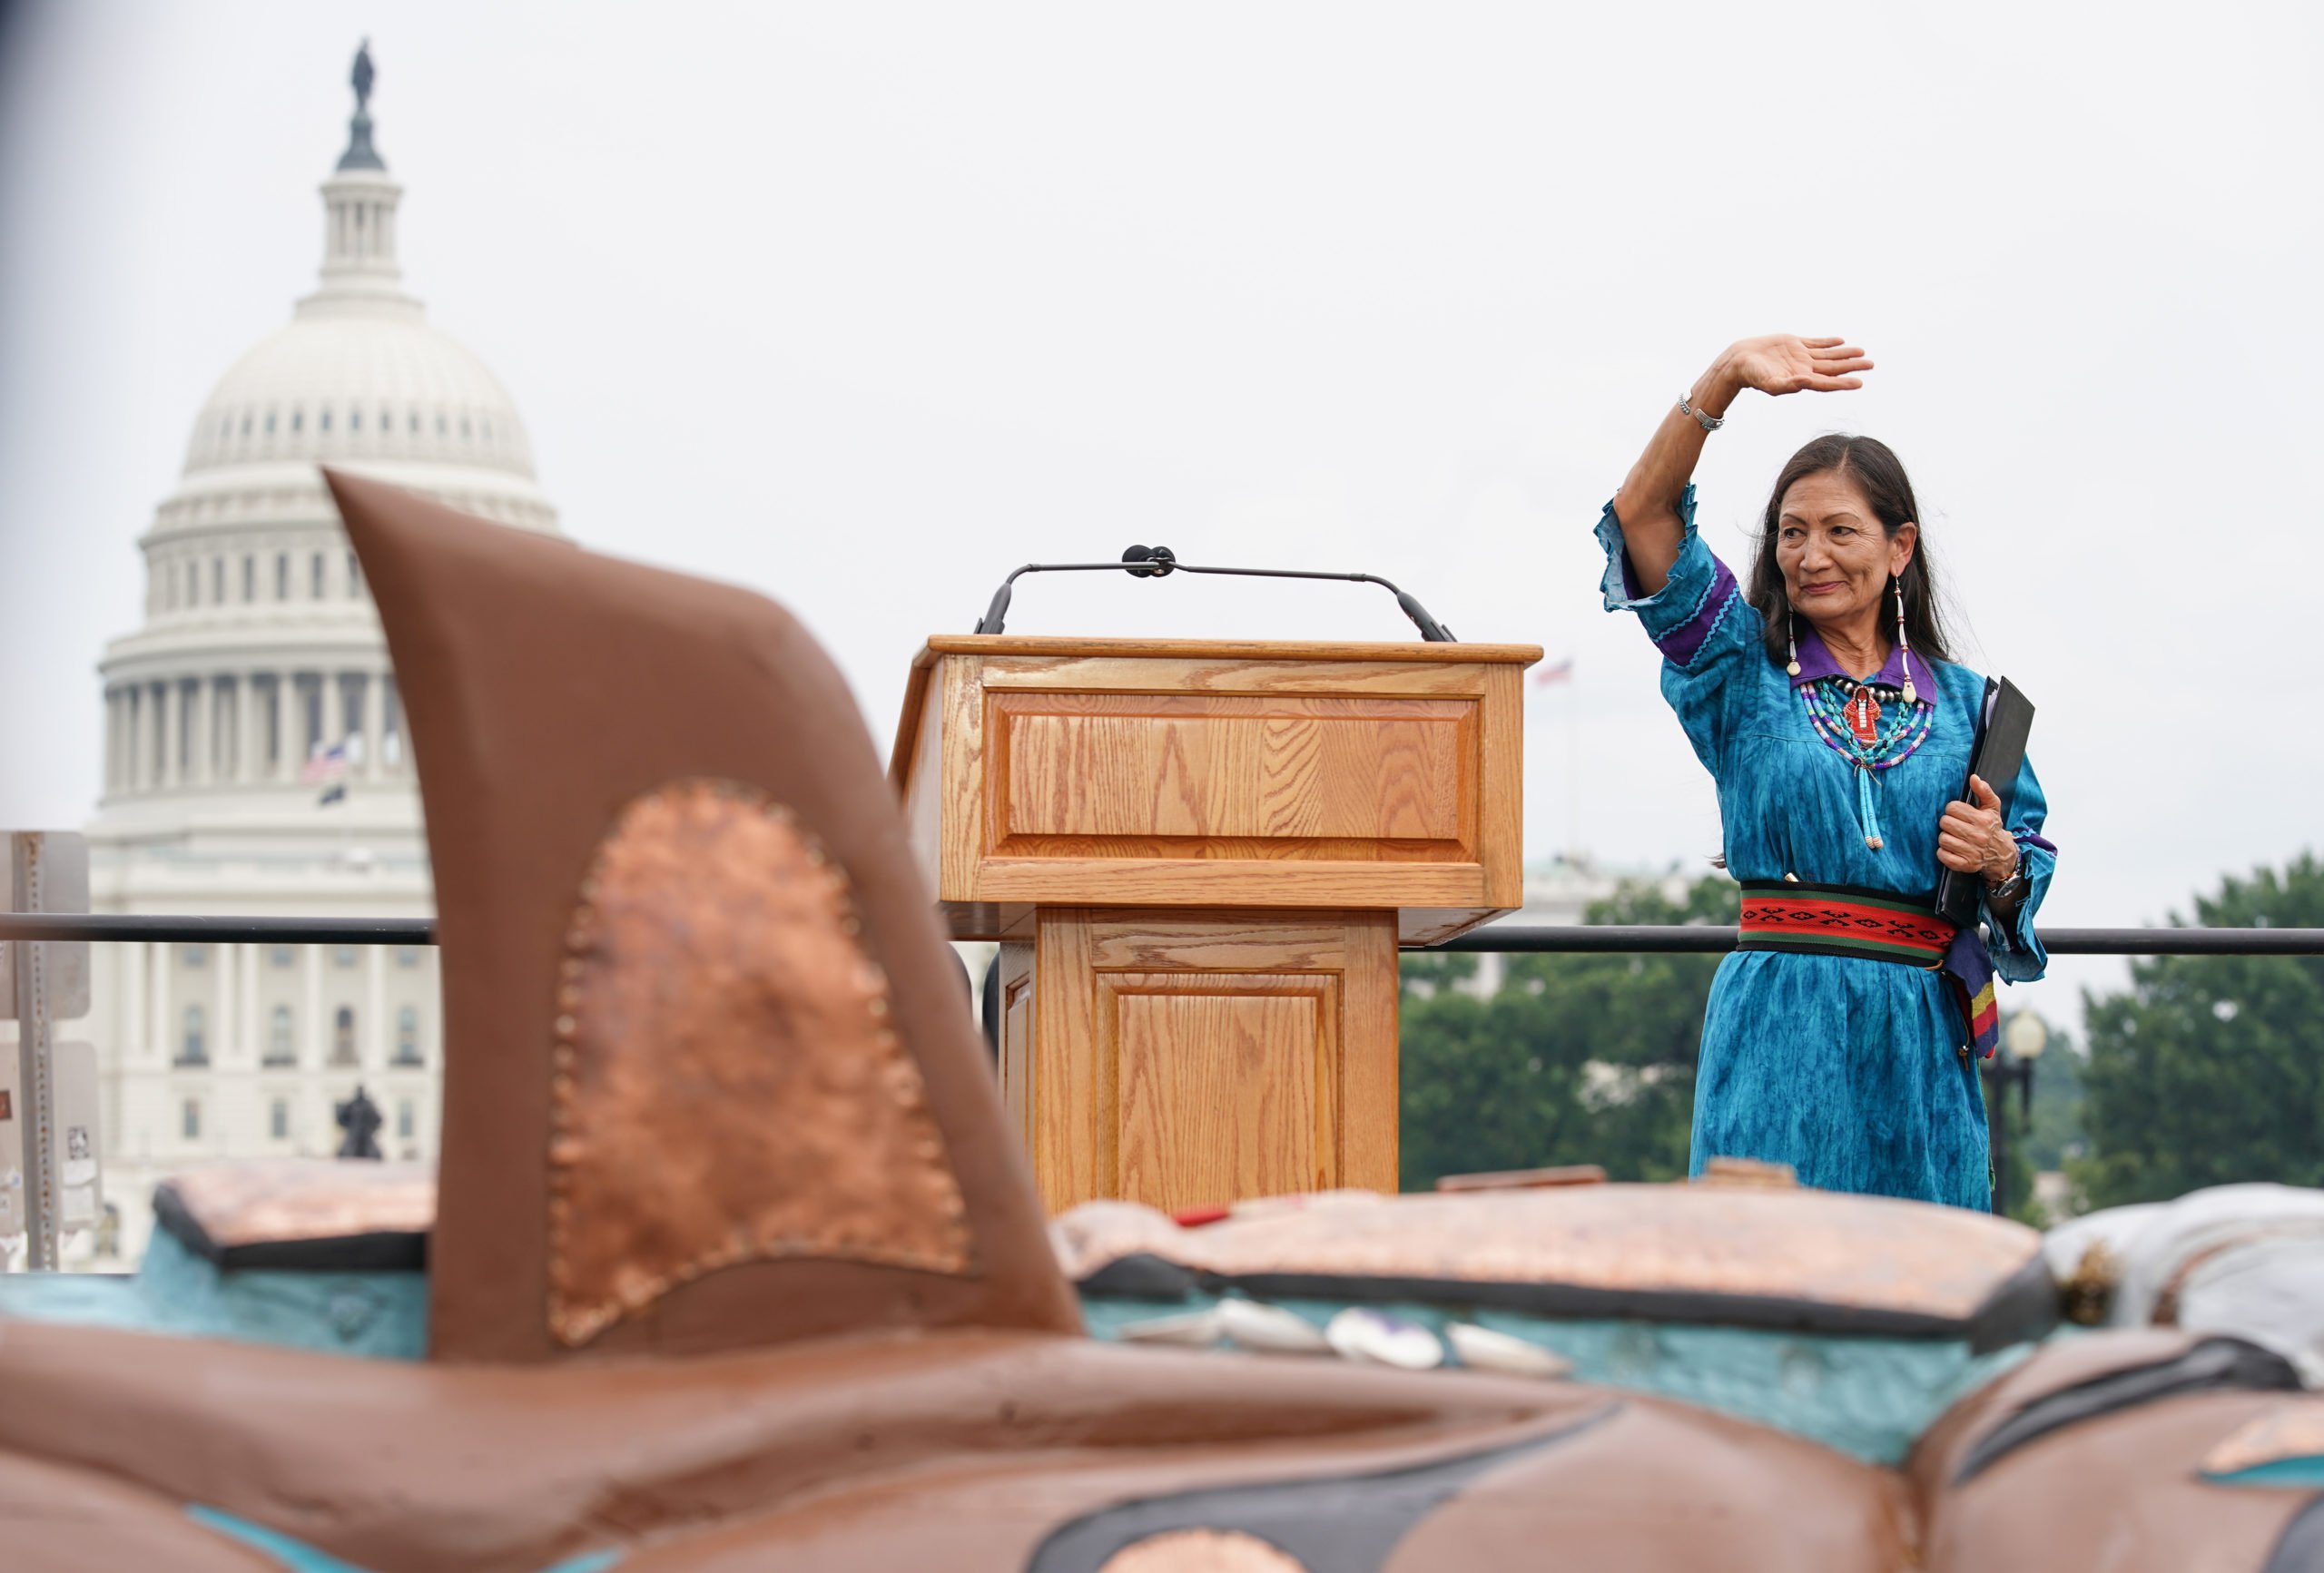 Secretary of the Interior Deb Haaland departs the stage at an event on July 29, 2021 in Washington, D.C. (Jemal Countess/Getty Images for Native Organizers Alliance)